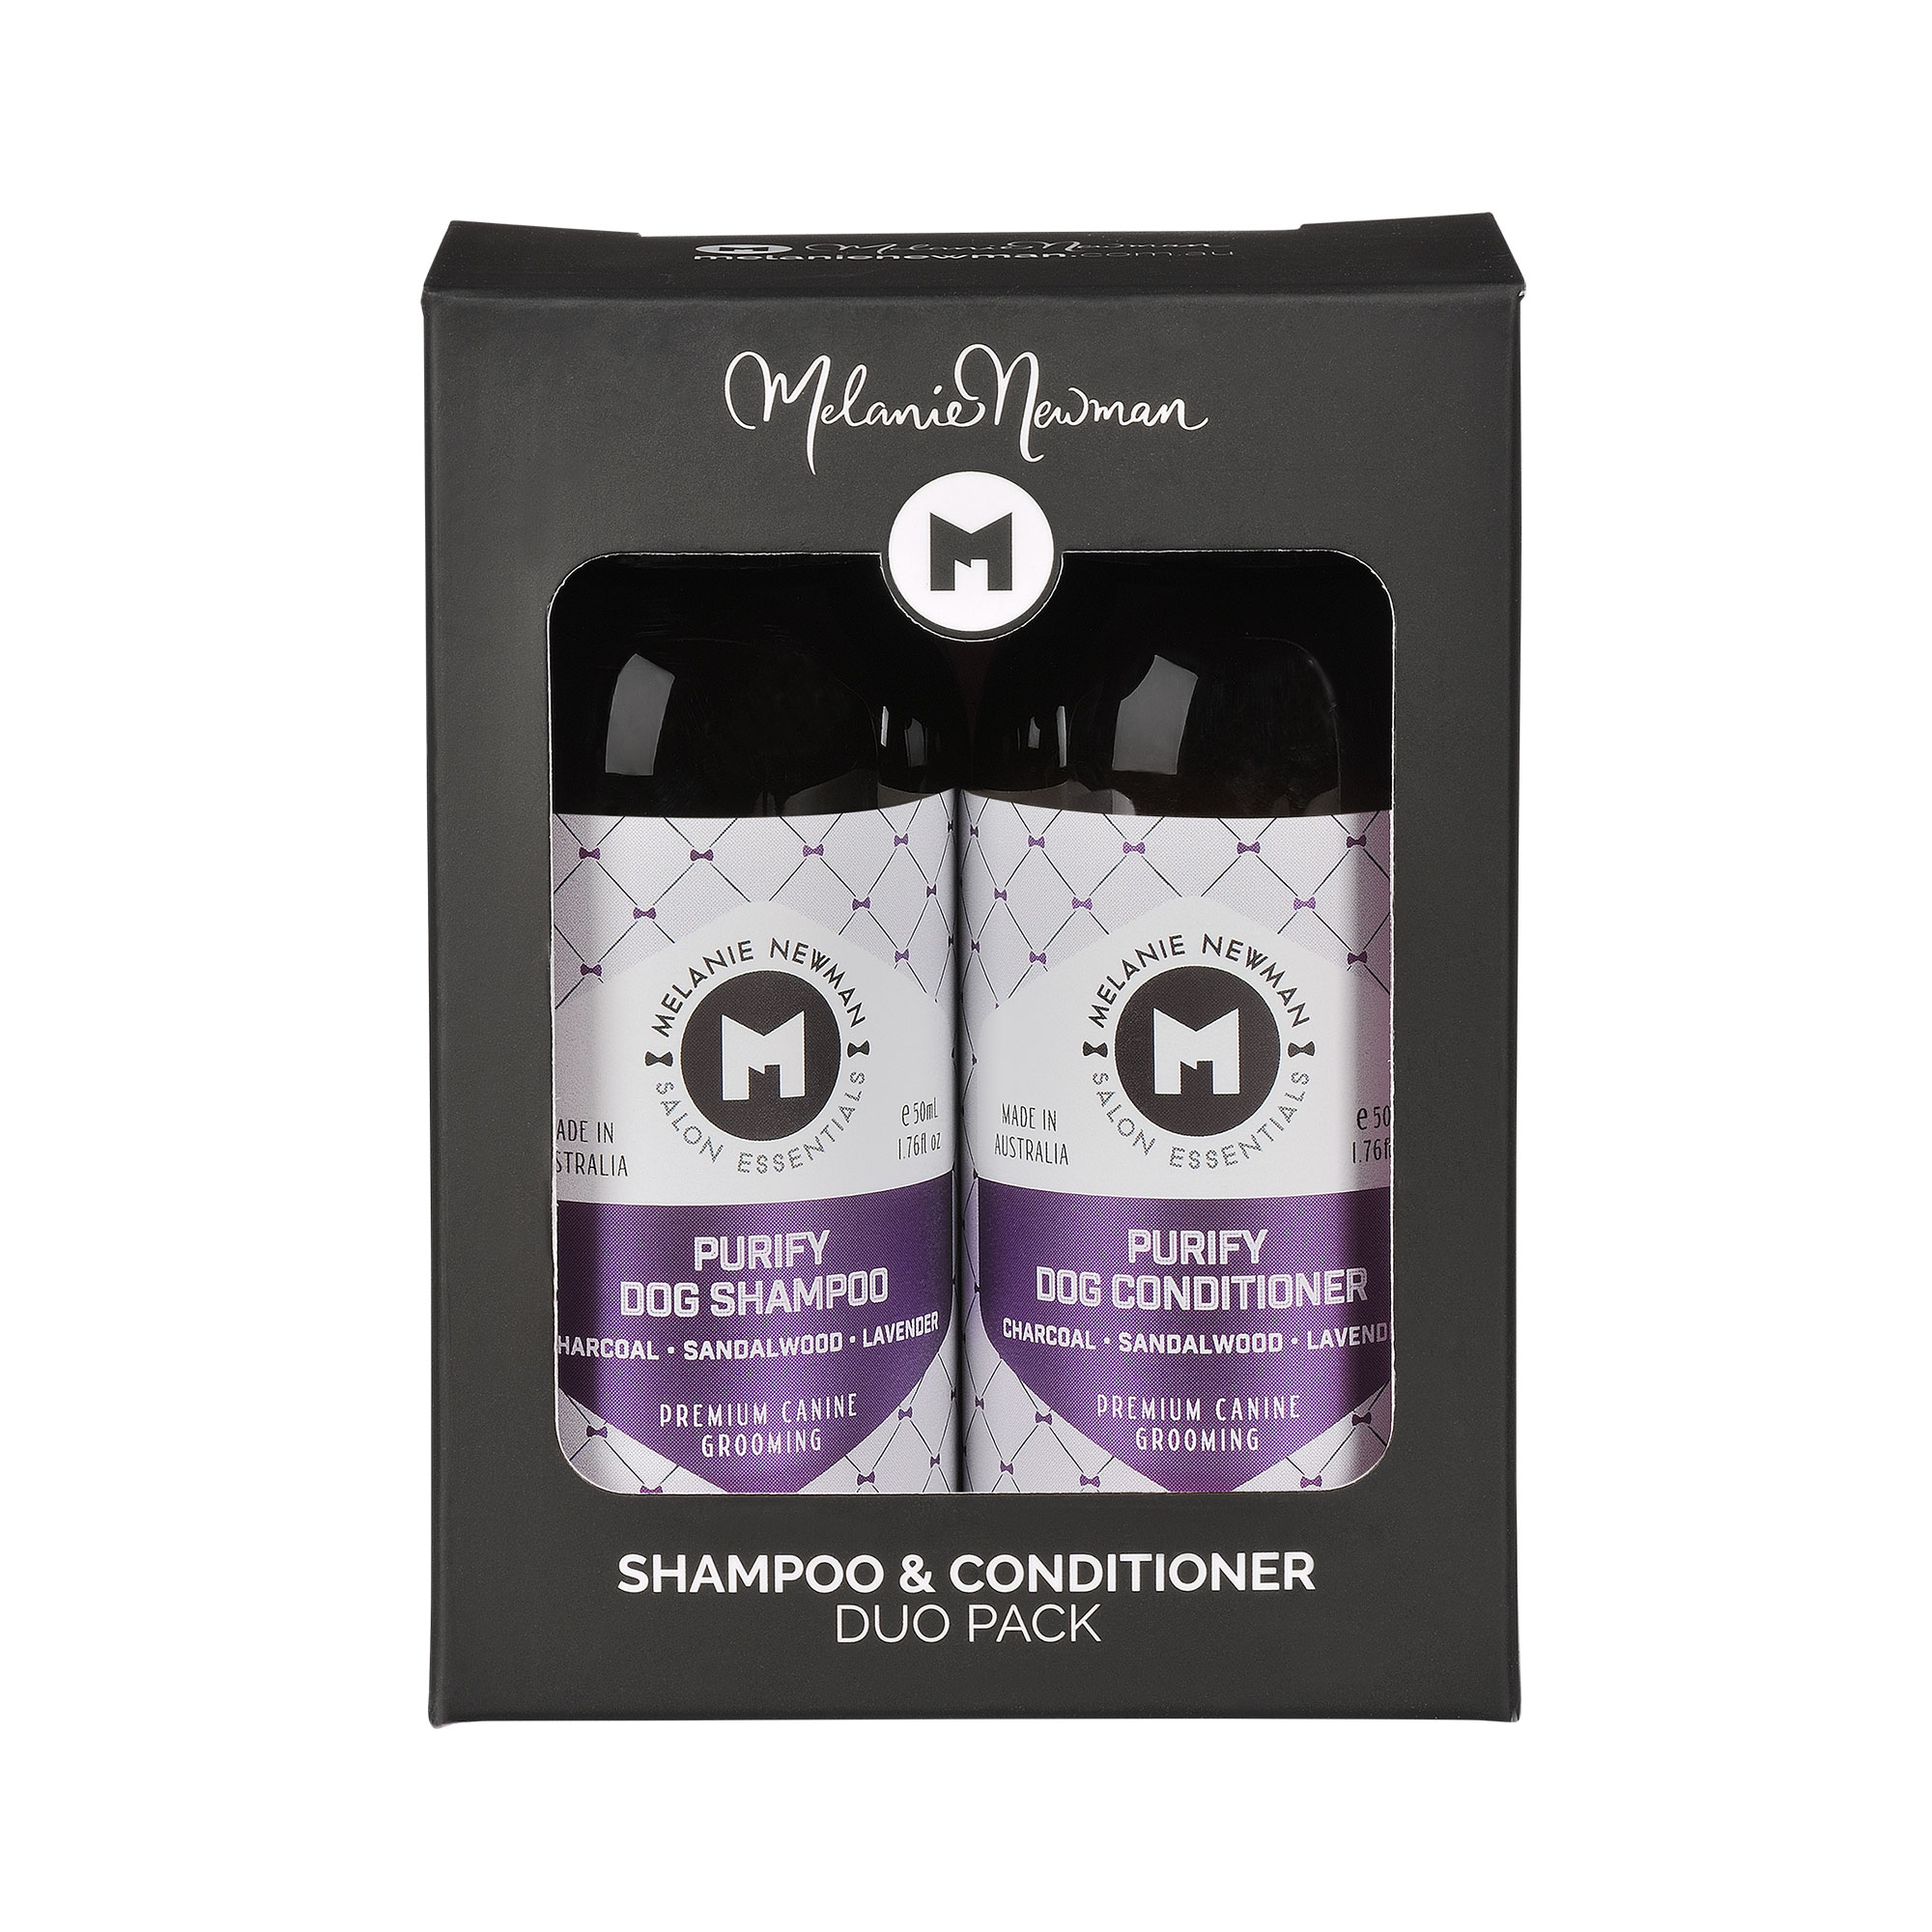 melanie newman purify shampoo conditioner 50ml duo pack for dog grooming